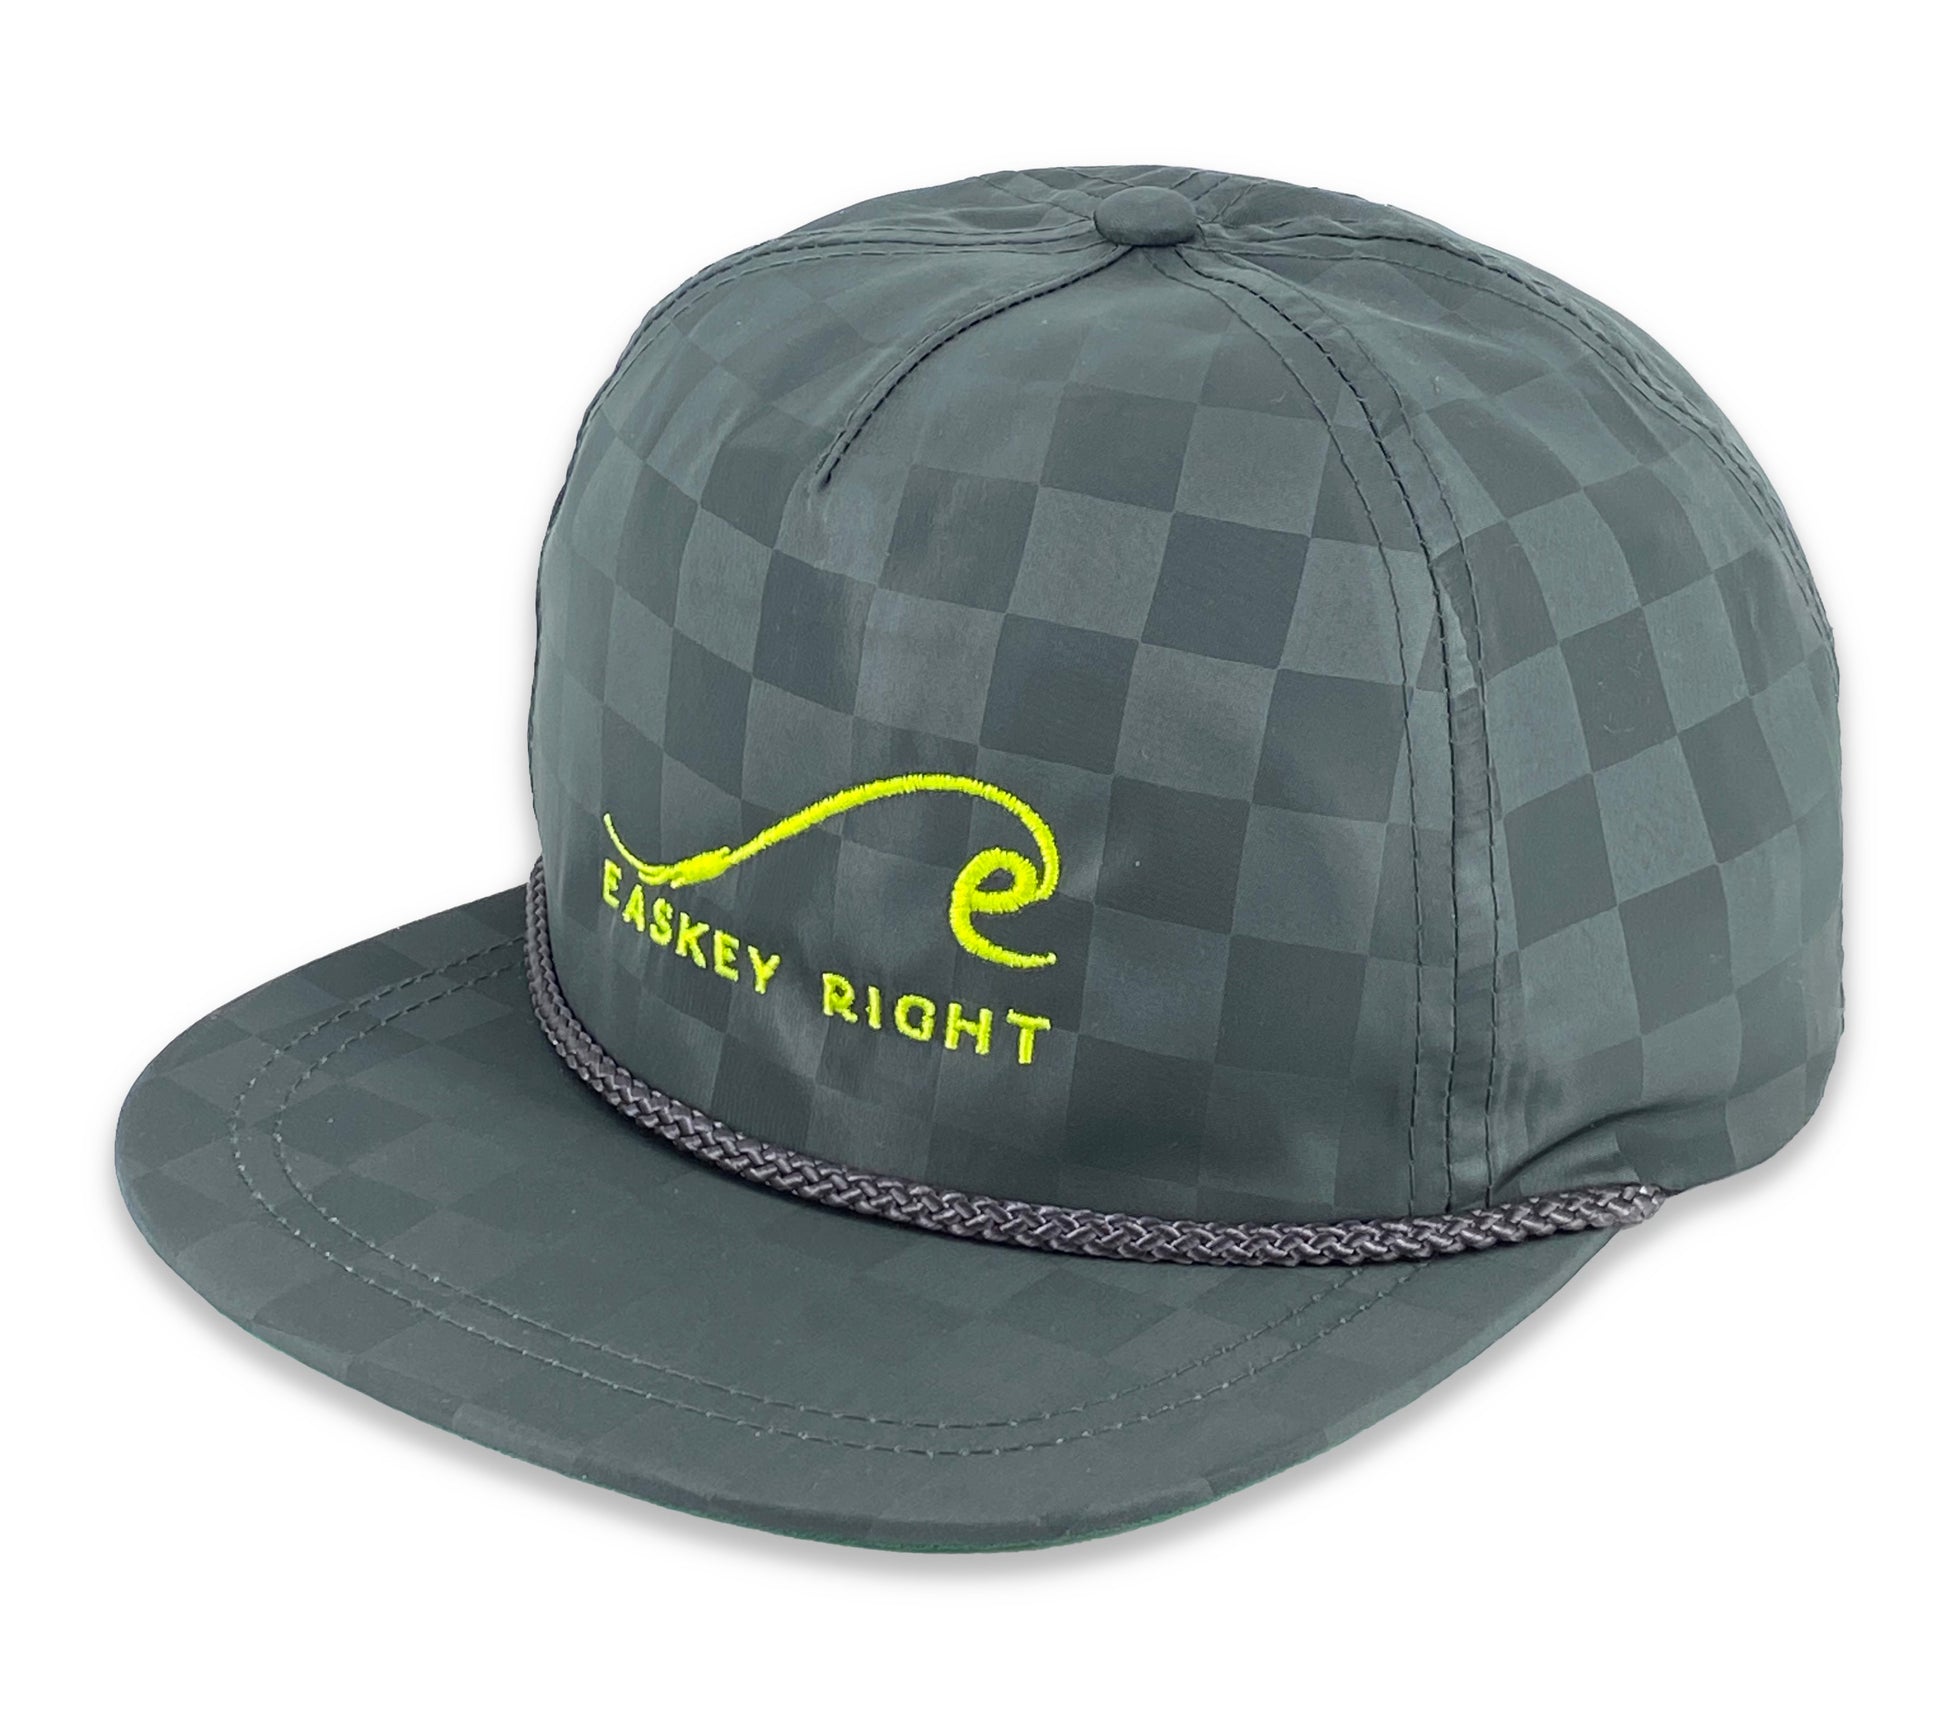 grey checkerboard hat with neon yellow wave